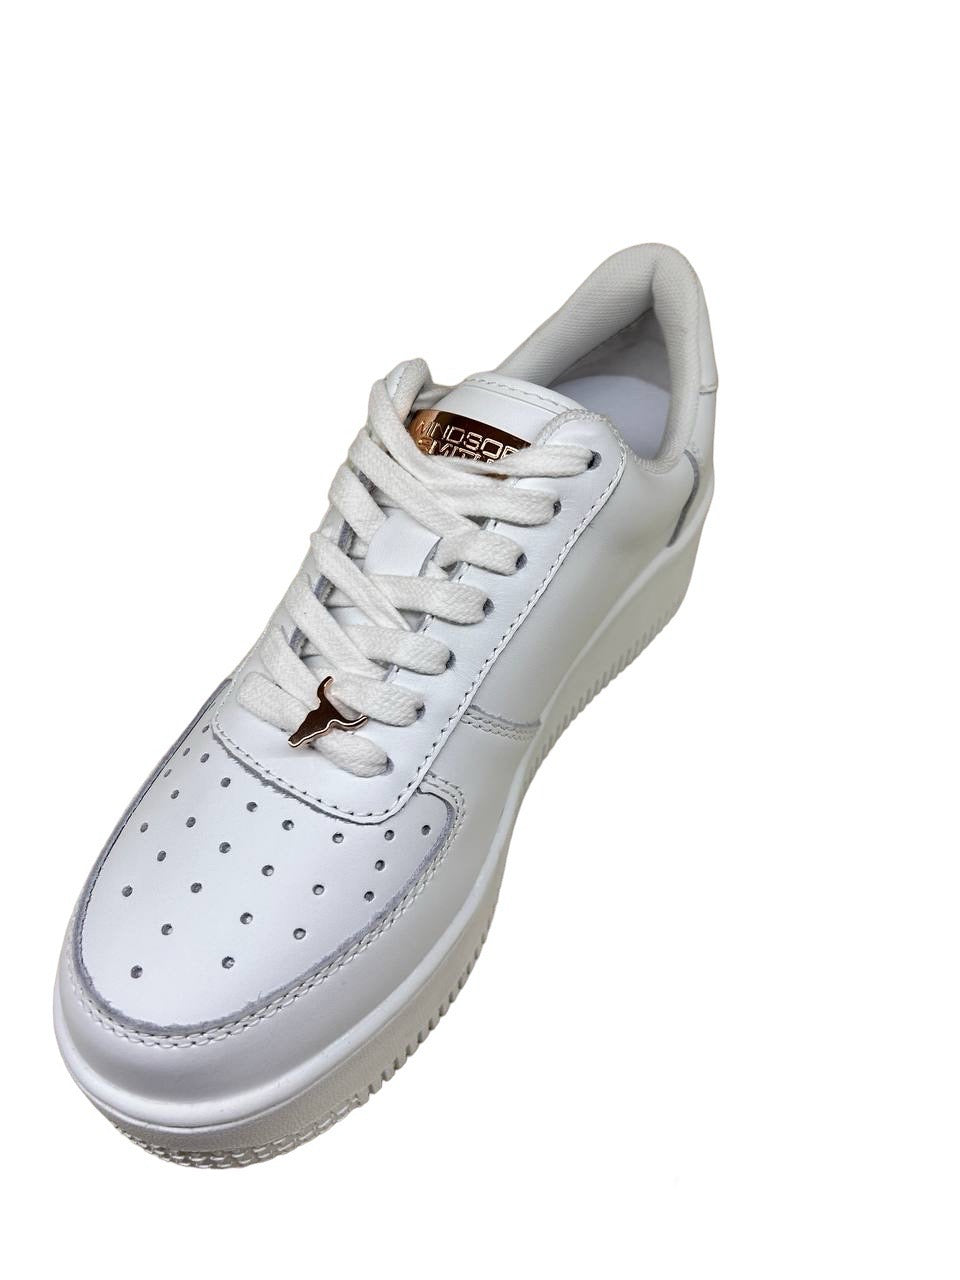 Windsor Smith RISE sneakers rose gold